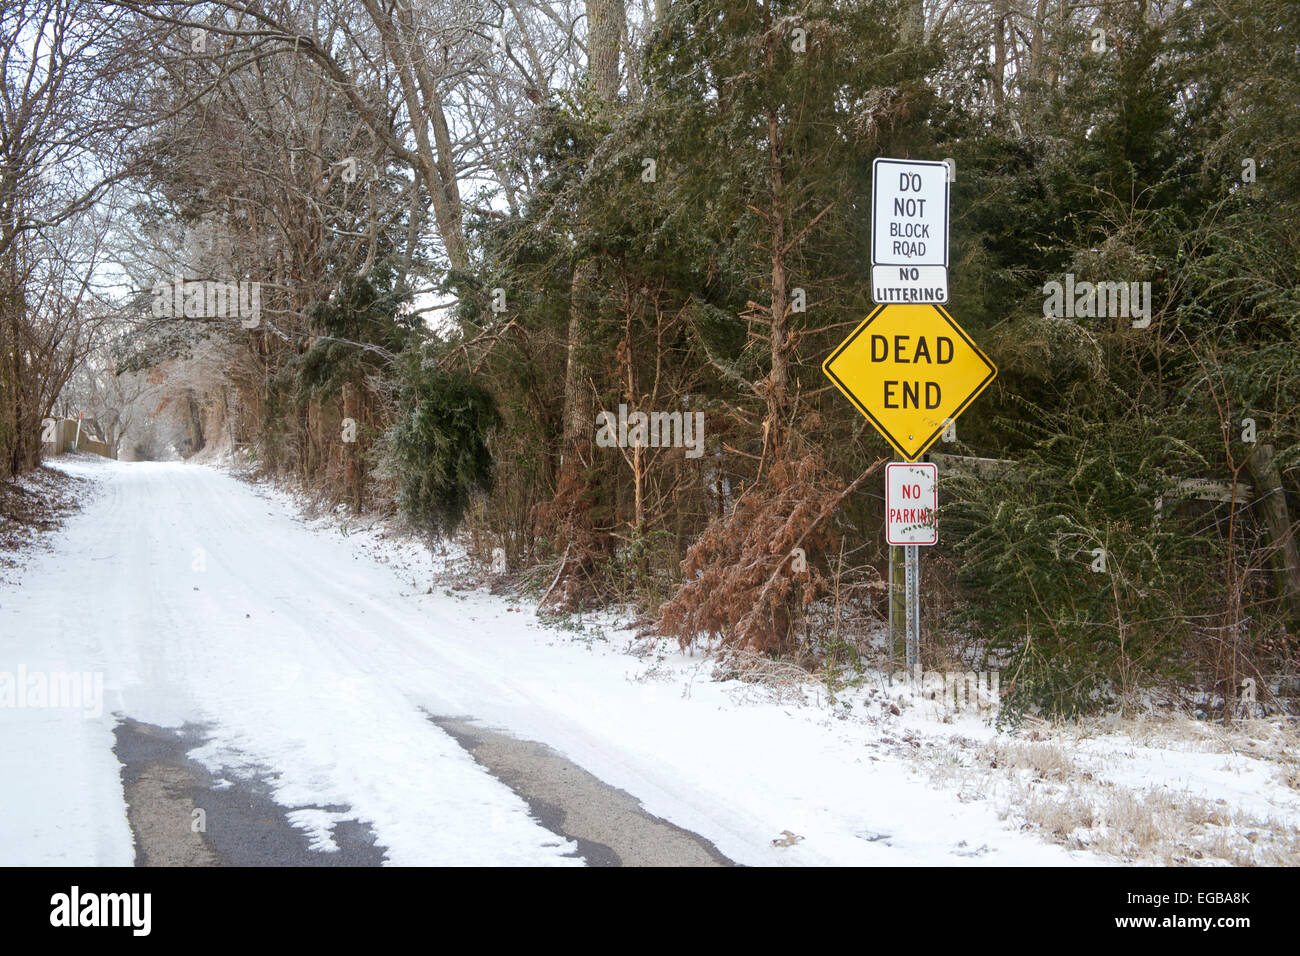 Snowy wooded roadway with dead end sign in front on entrance. Stock Photo